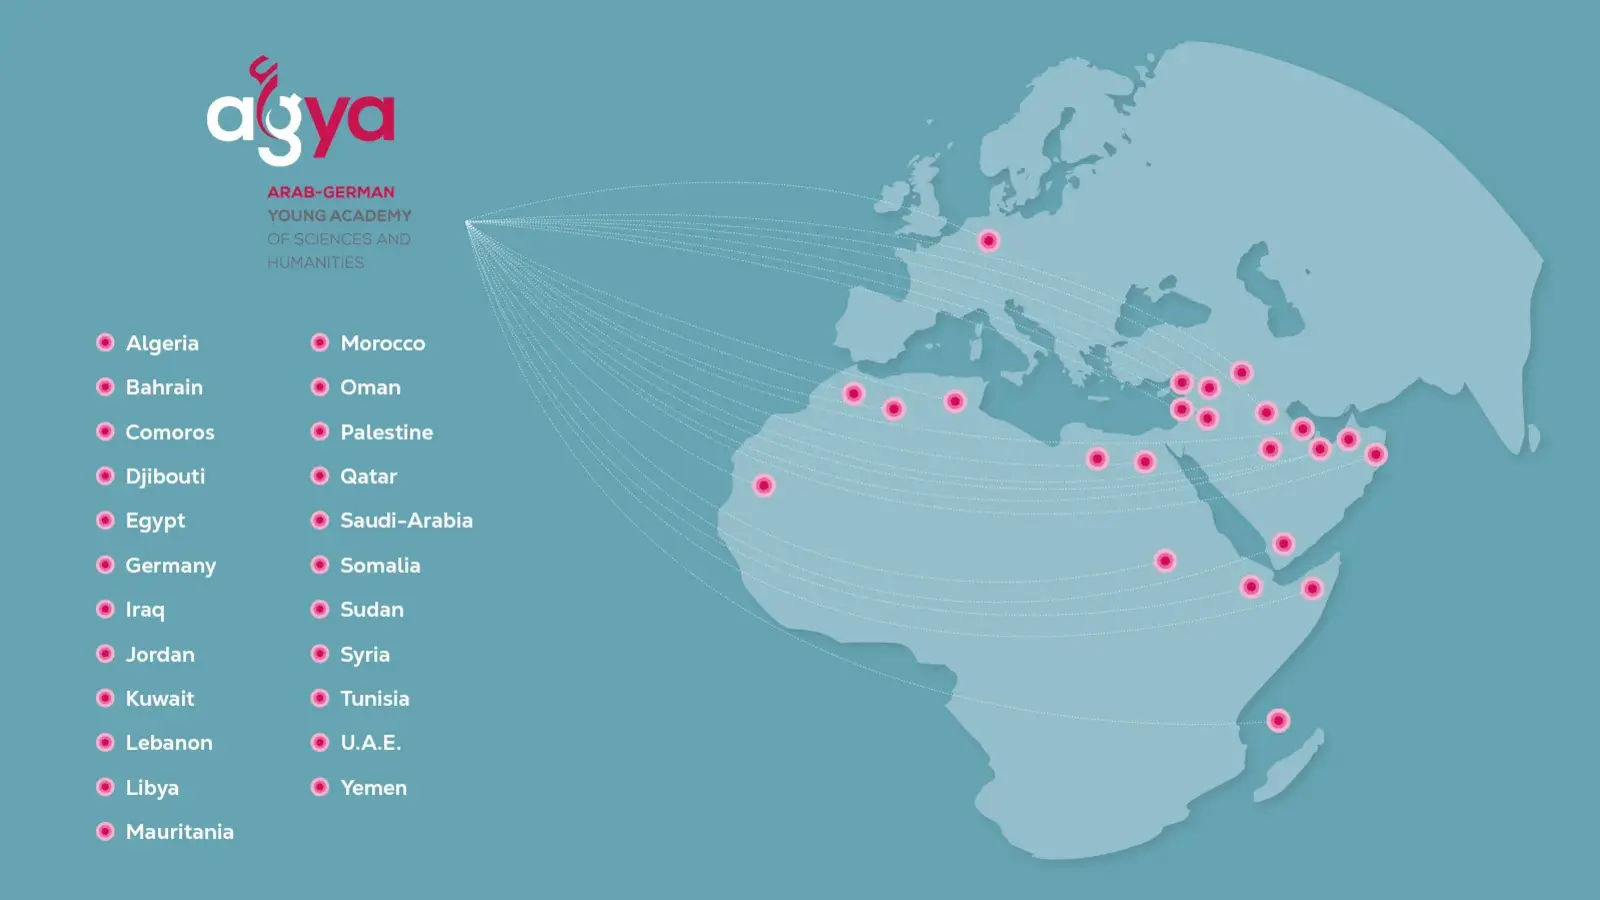 Map of AGYA network: Europe, the Middle East, and North Africa with pink dots